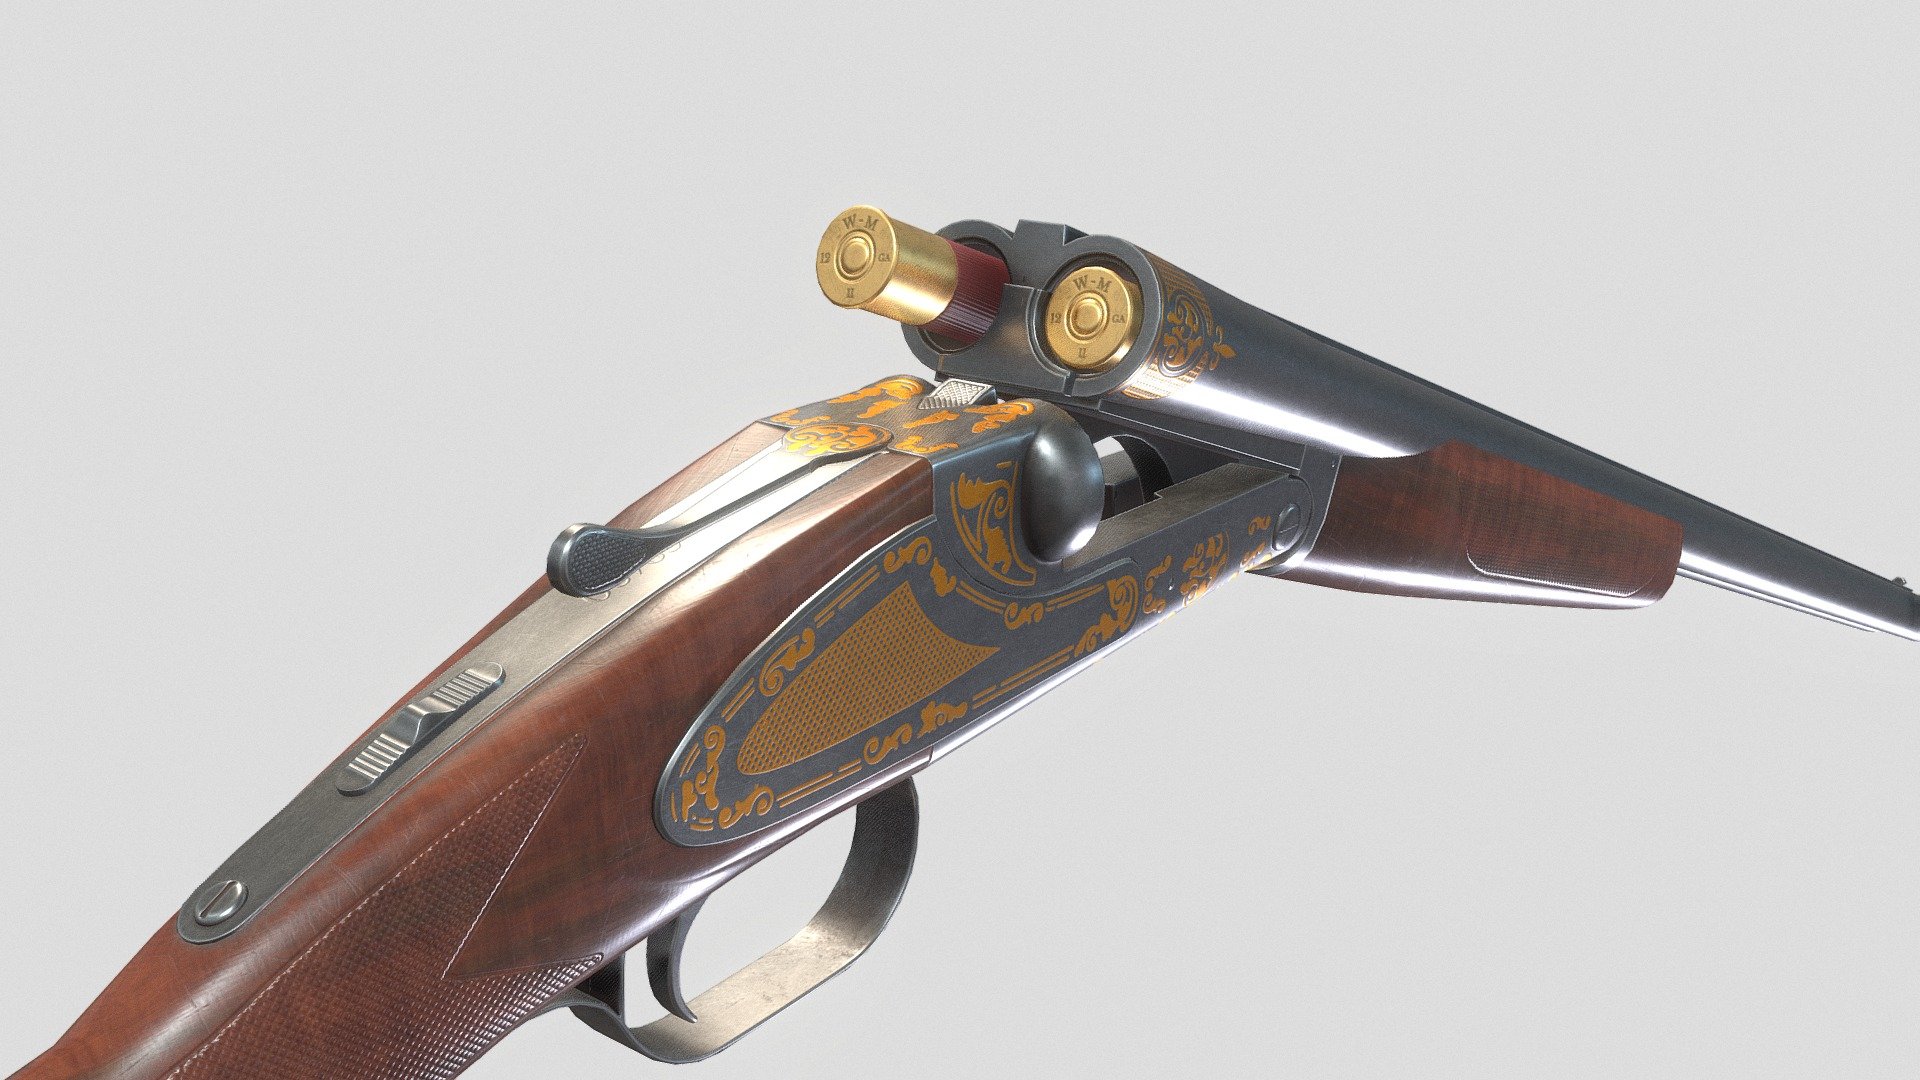 The Winchester Model 21 is a deluxe side by side shotgun. The shotgun's initial production run from 1931 through 1960 yielded approximately 30,000 guns. Winchester Repeating Arms Company ceased the main production line of this shotgun in 1960 and the Model 21 was sourced to the Winchester Custom Shop until the gun's retirement in 1991. New Winchester Model 21 production continues under license to Connecticut Shotgun Manufacturing Company.

Model was created in Blender
Baking was done in Marmoset
Texture in Substance Painter - Winchester M21 Shotgun - Buy Royalty Free 3D model by Ovidiu Barat (@OvidiuBarat) 3d model